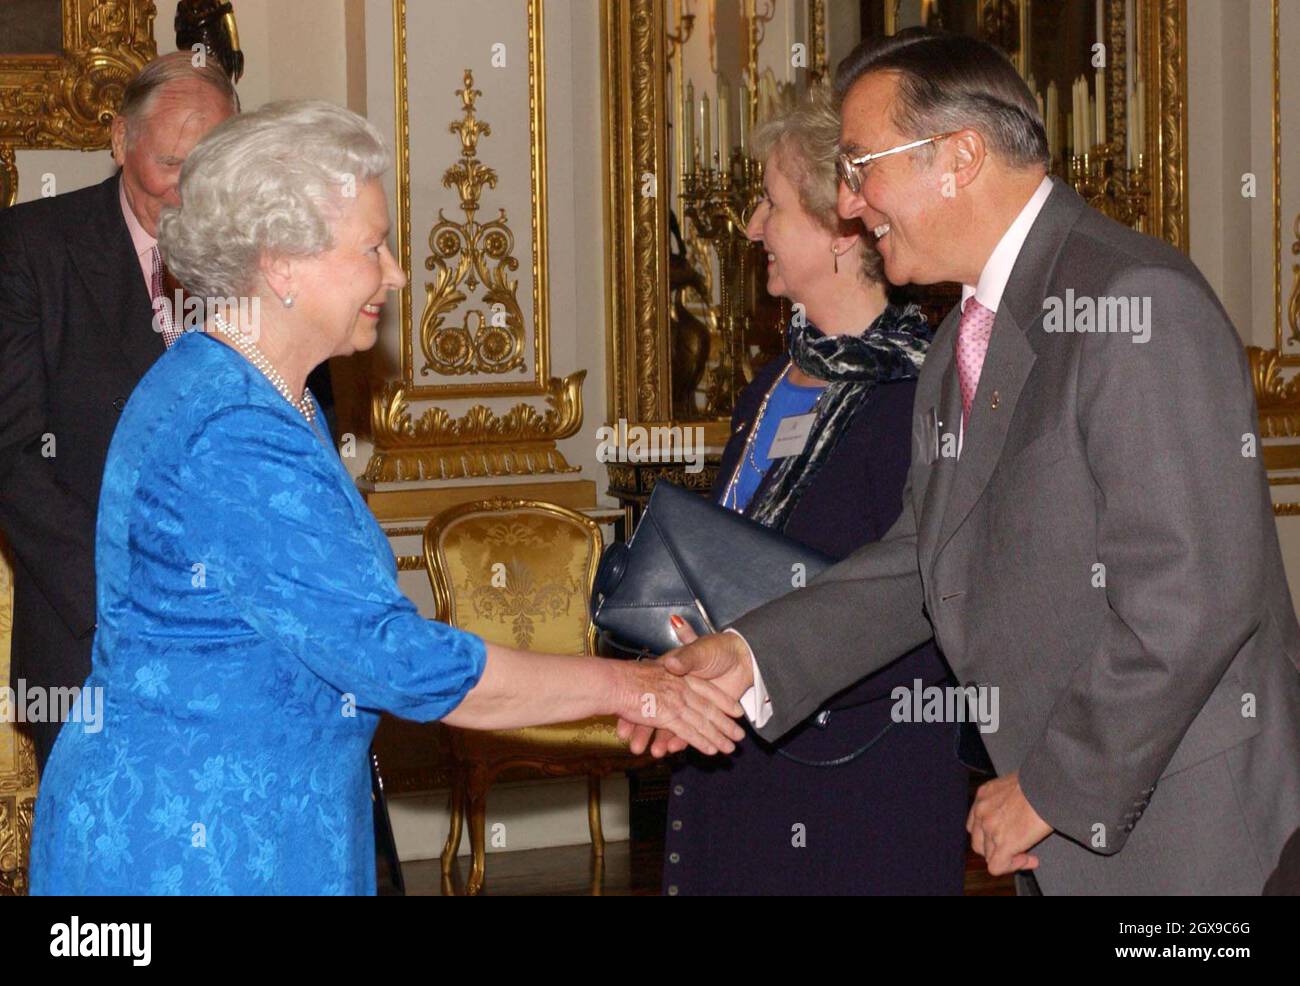 Queen Elizabeth II greets inventor and exporter of level crossings, Peter Coates-Smith at a reception at Buckingham Palace, London,  which aims to pay tribute to more than 400 pioneers of British Life. Â©Anwar Hussein/allactiondigital.com  Stock Photo